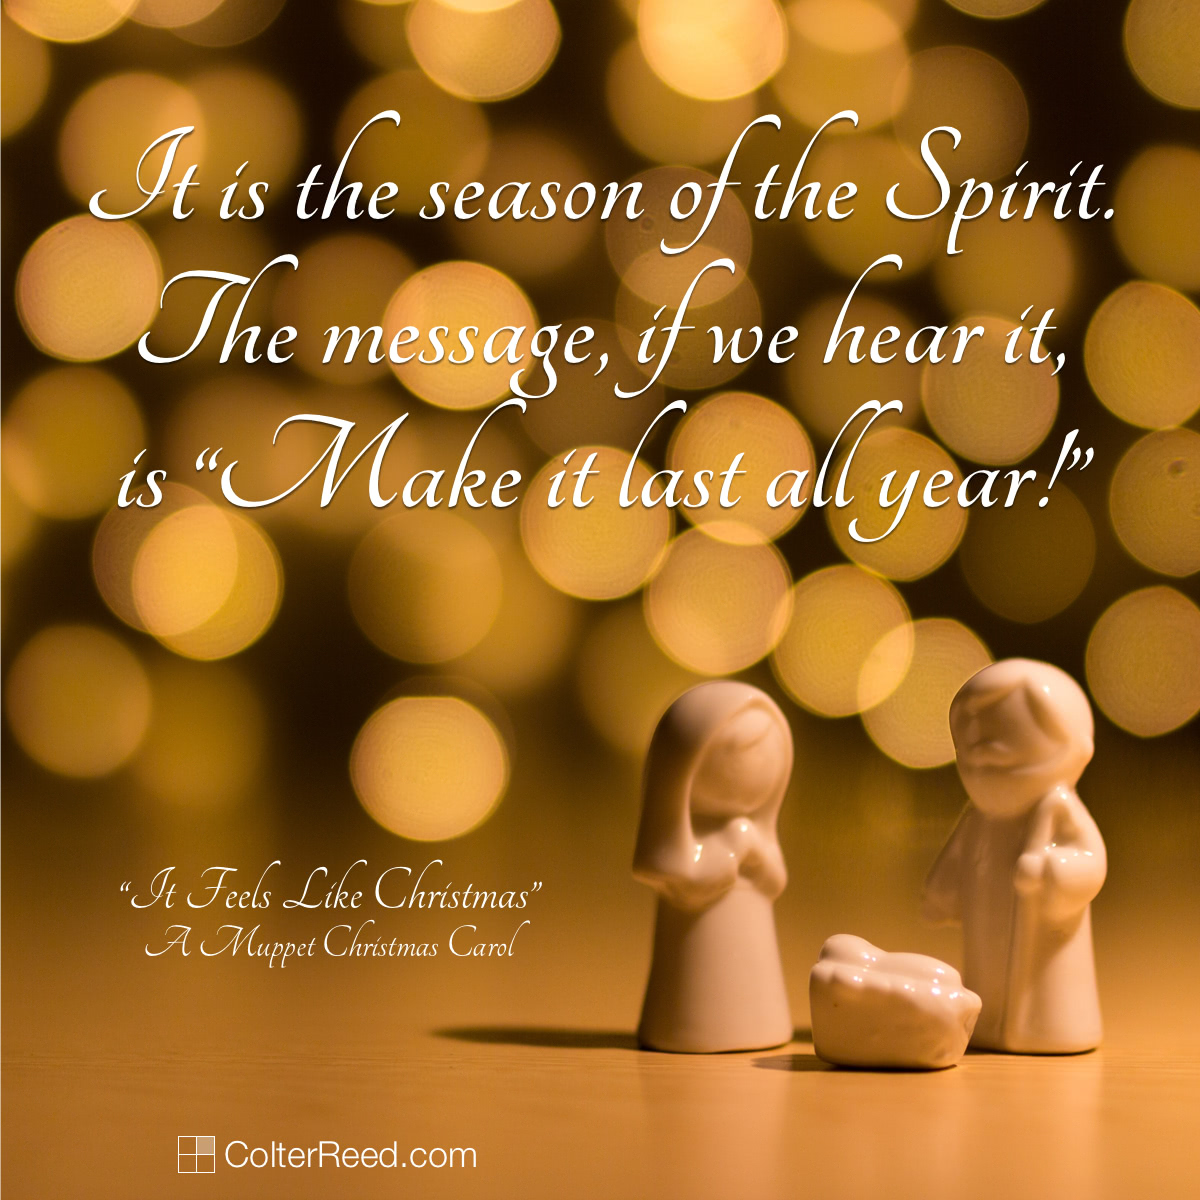 It is the season of the Spirit. The message, if we hear it, is “Make it last all year!”